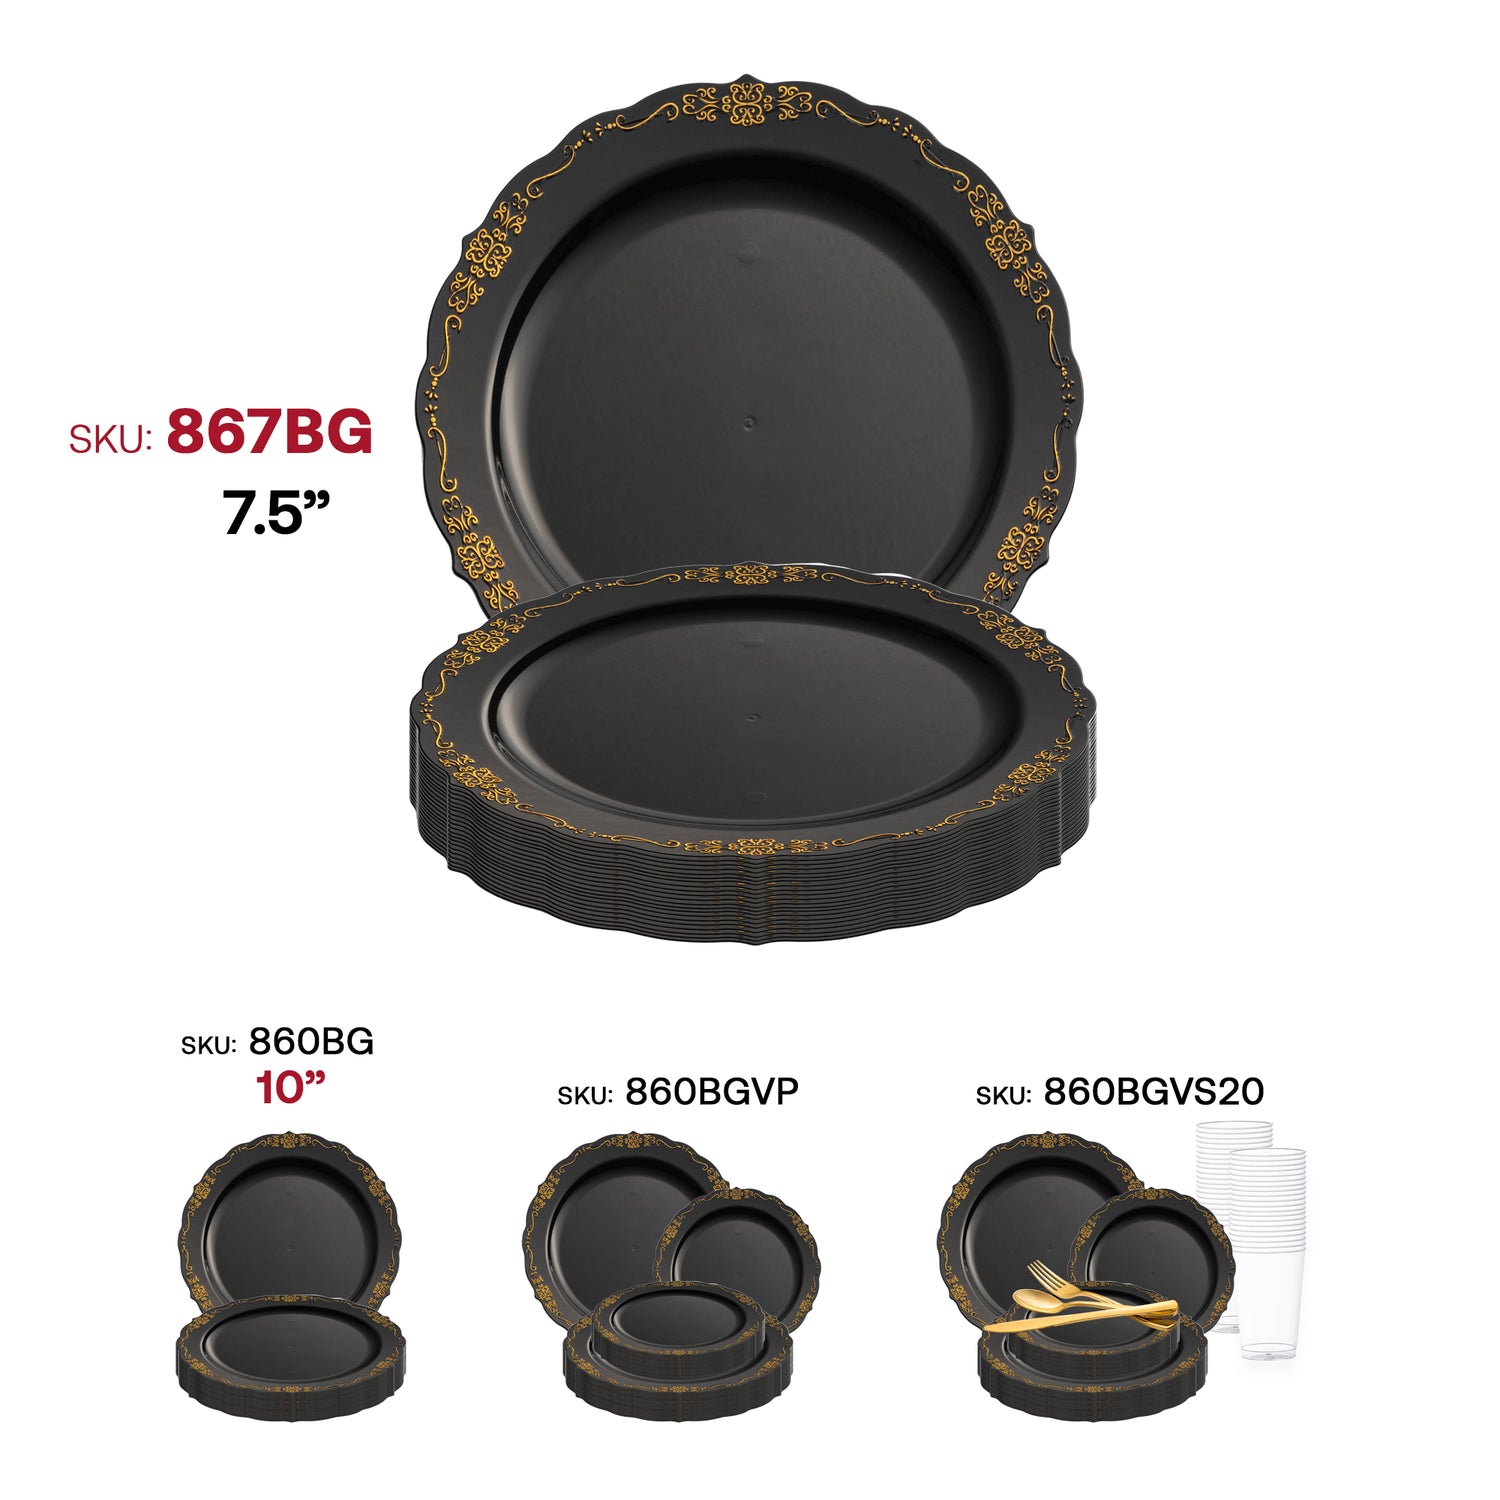 Black with Gold Vintage Rim Round Disposable Plastic Appetizer/Salad Plates (7.5") SKU | The Kaya Collection